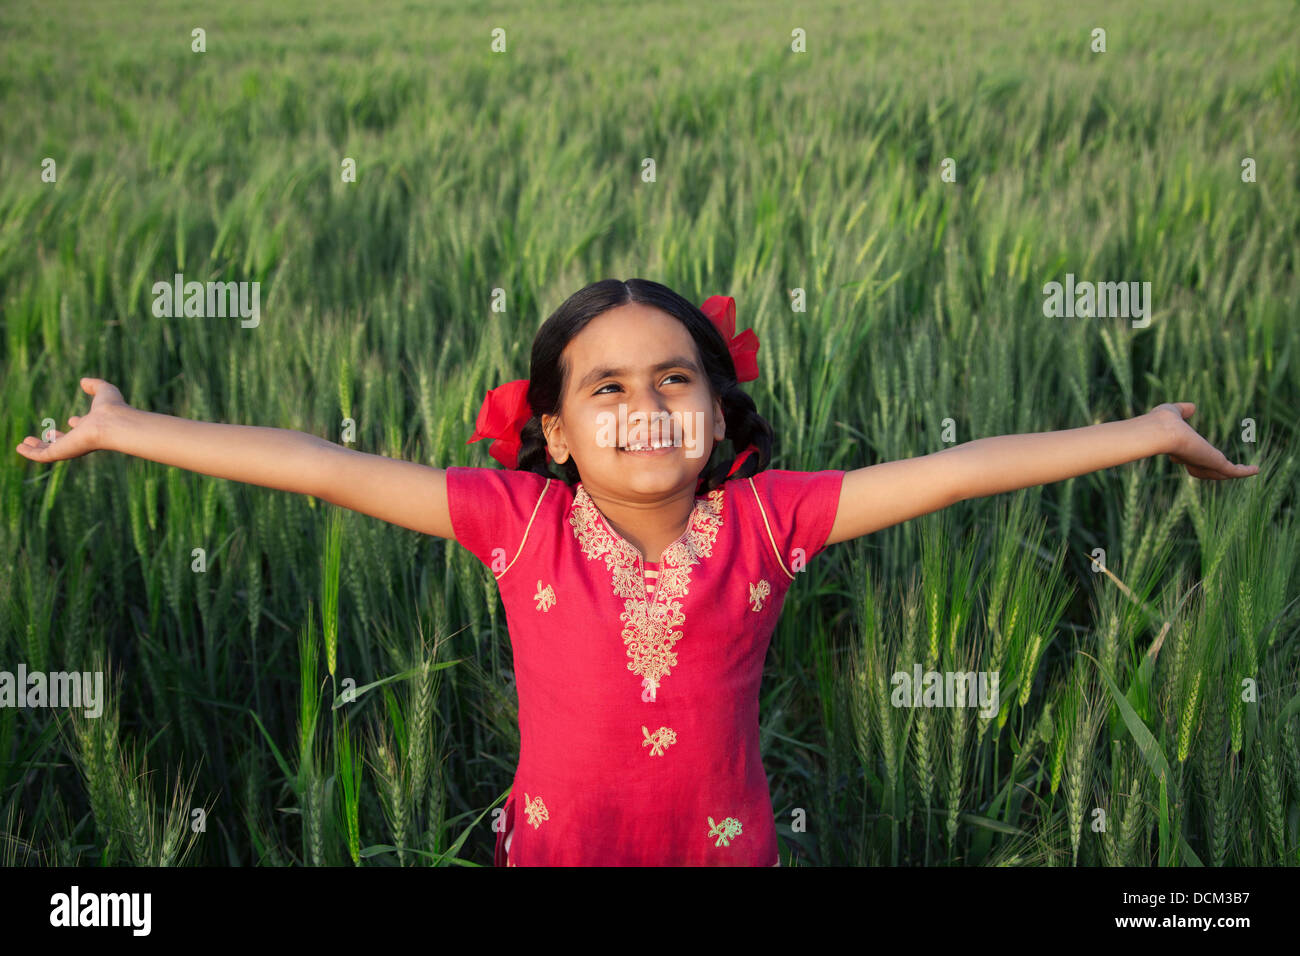 Little girl standing with arms out in a wheat field Stock Photo